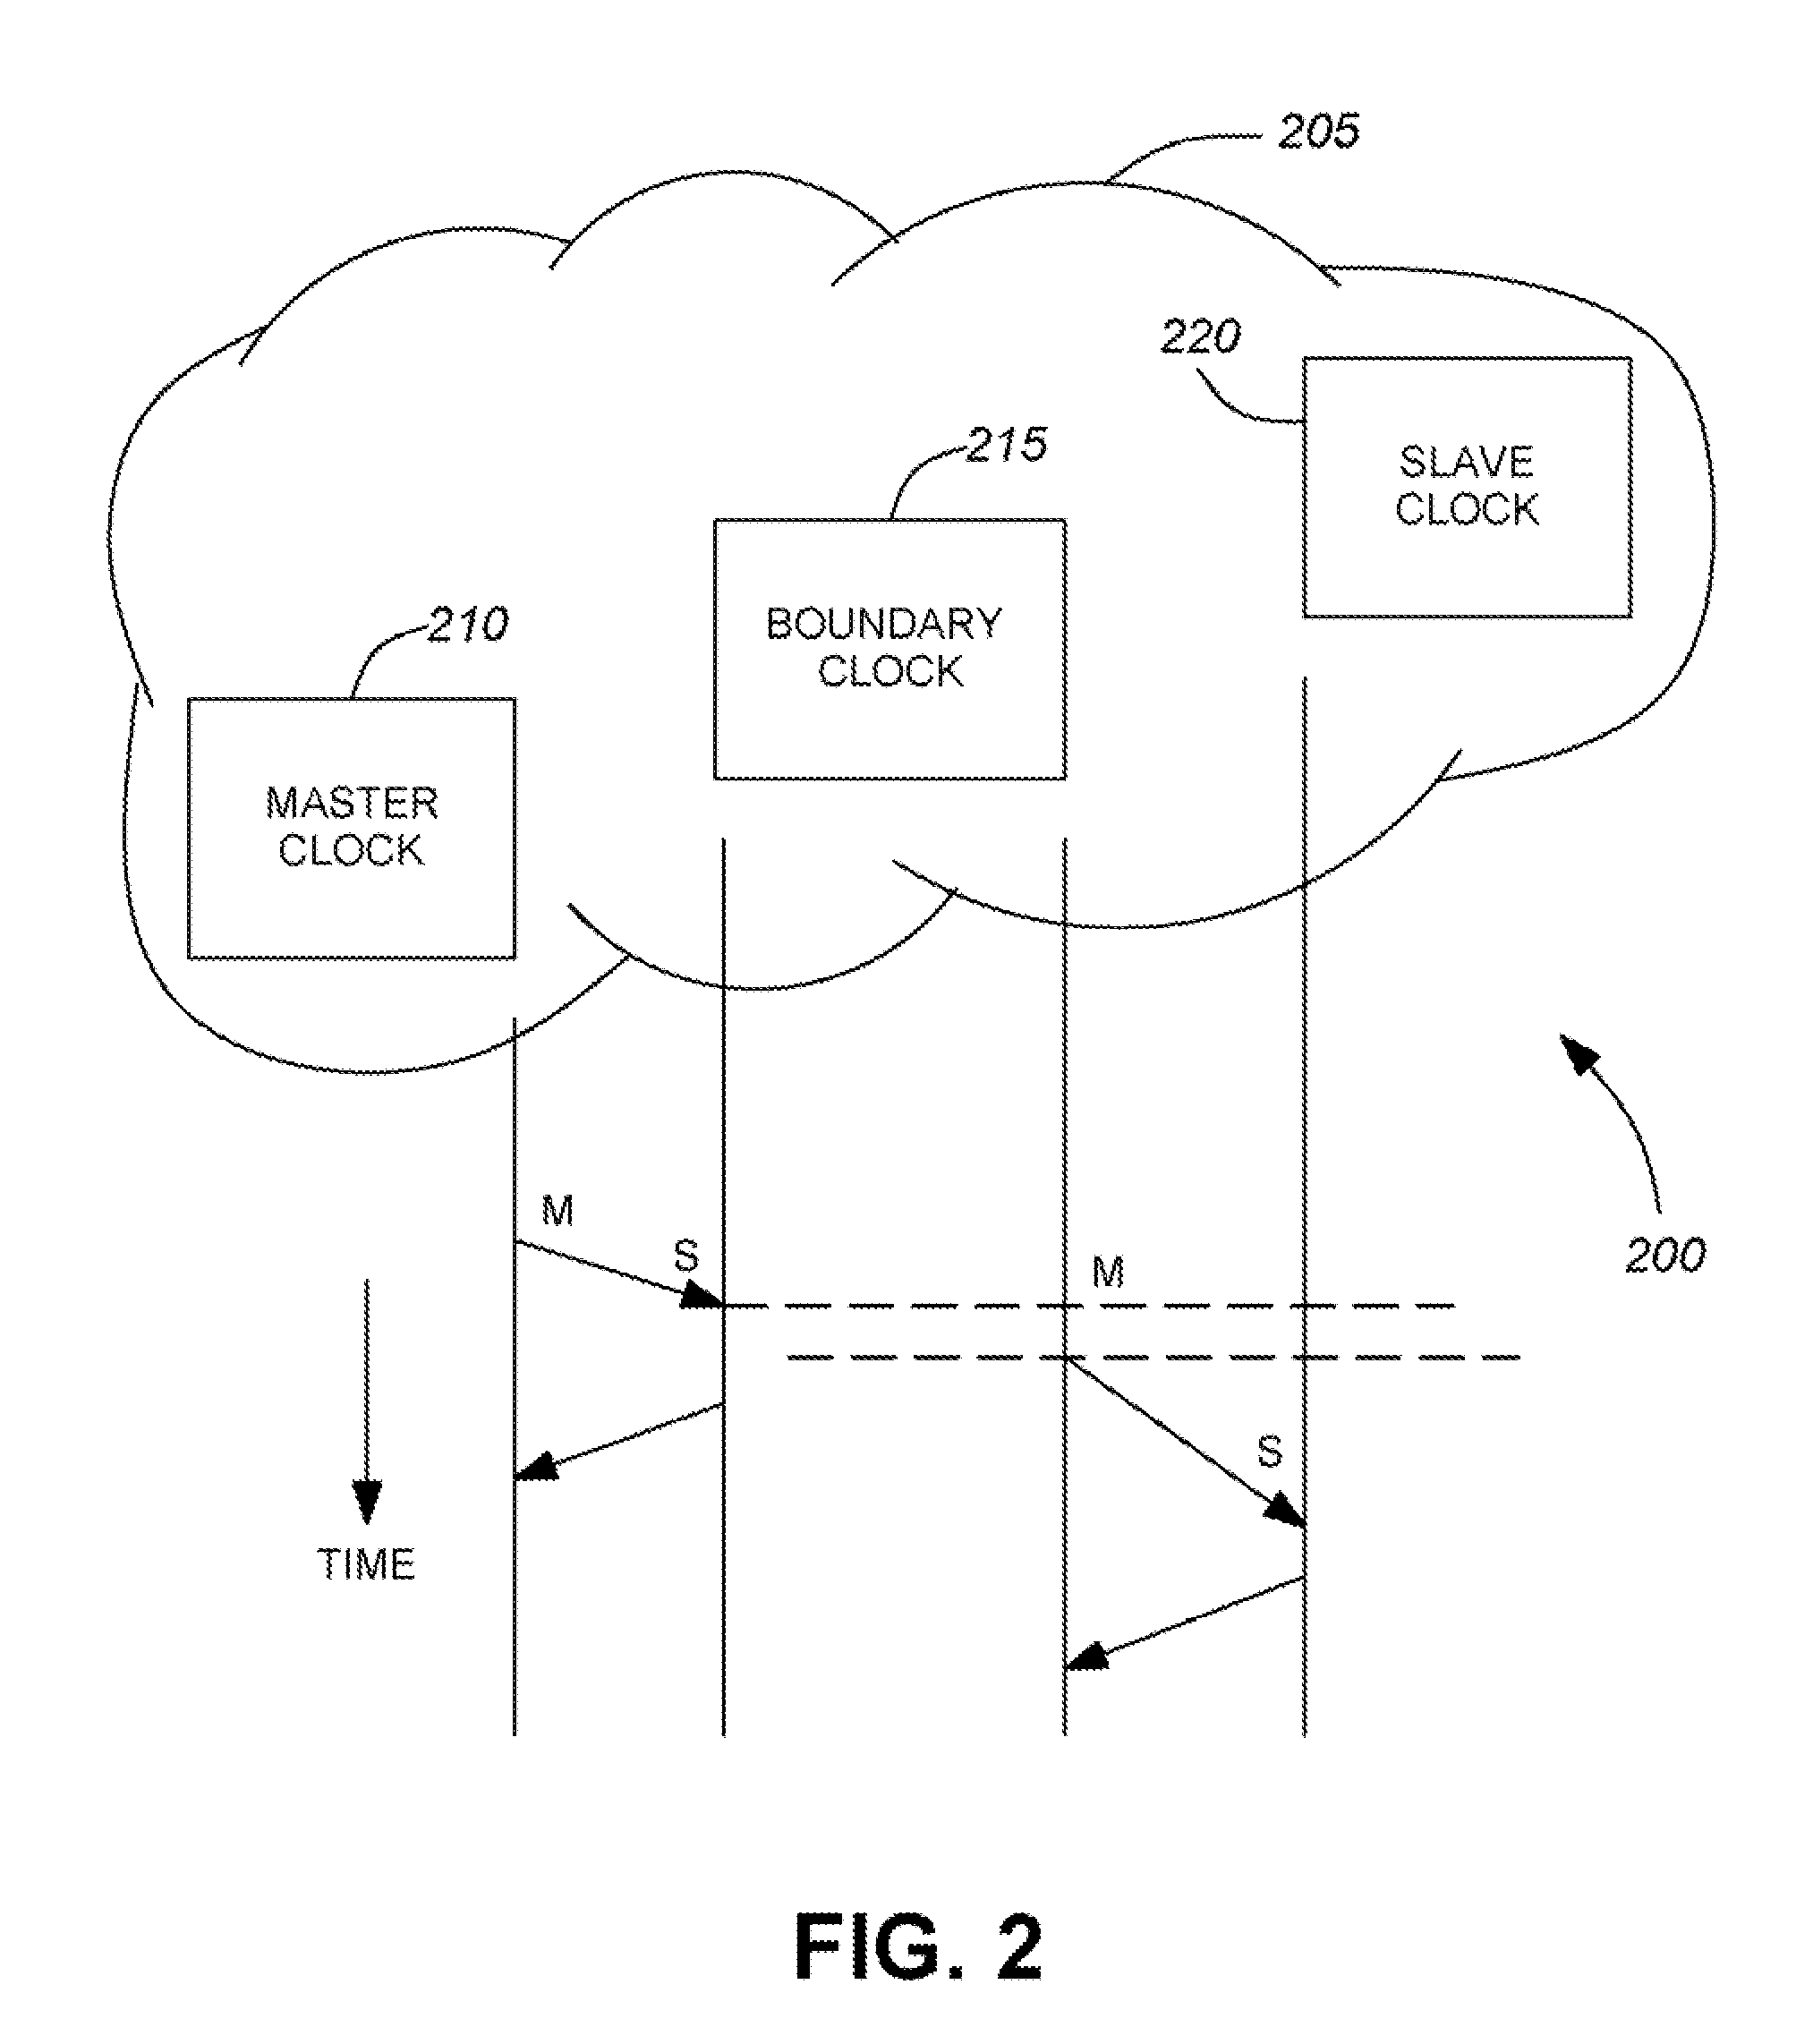 Method for distributing a common time reference within a distributed architecture